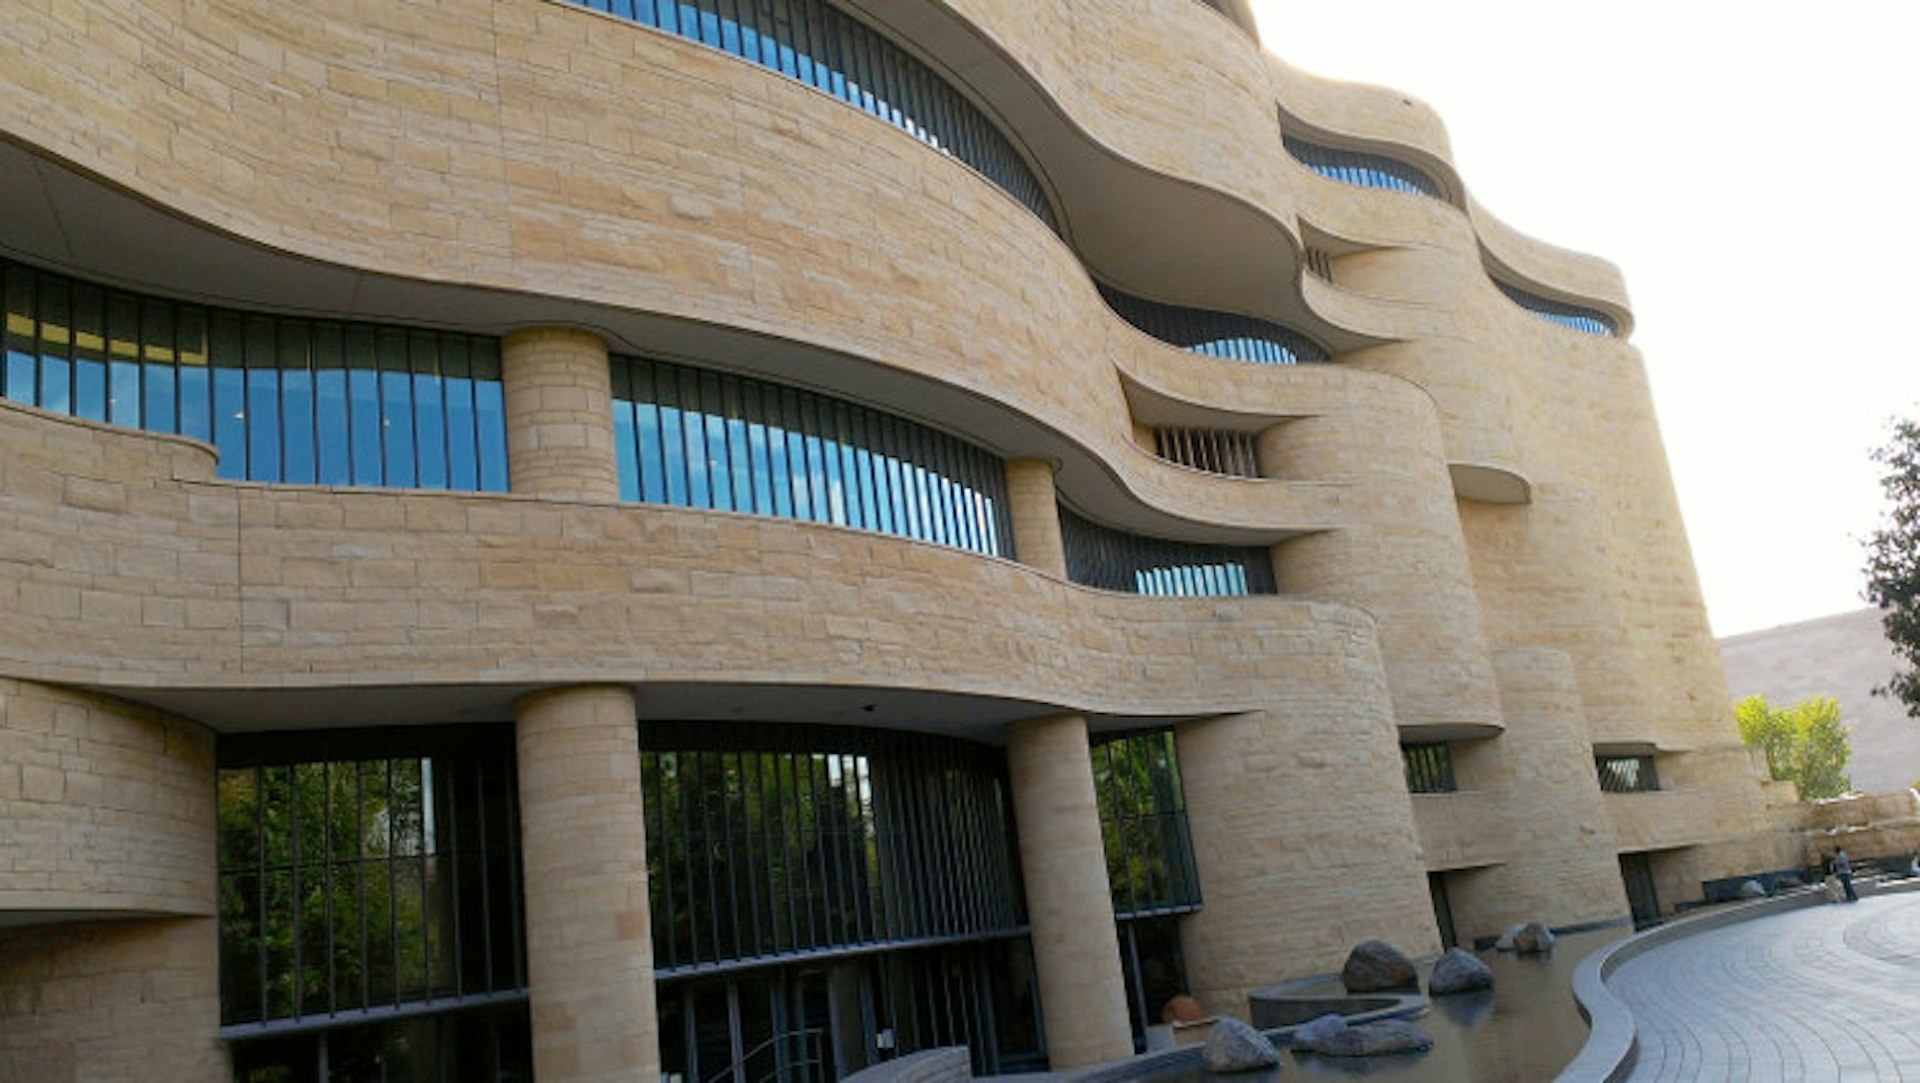 Exterior of the National Museum of the American Indian. Image by Kārlis Dambrāns / CC BY 2.0